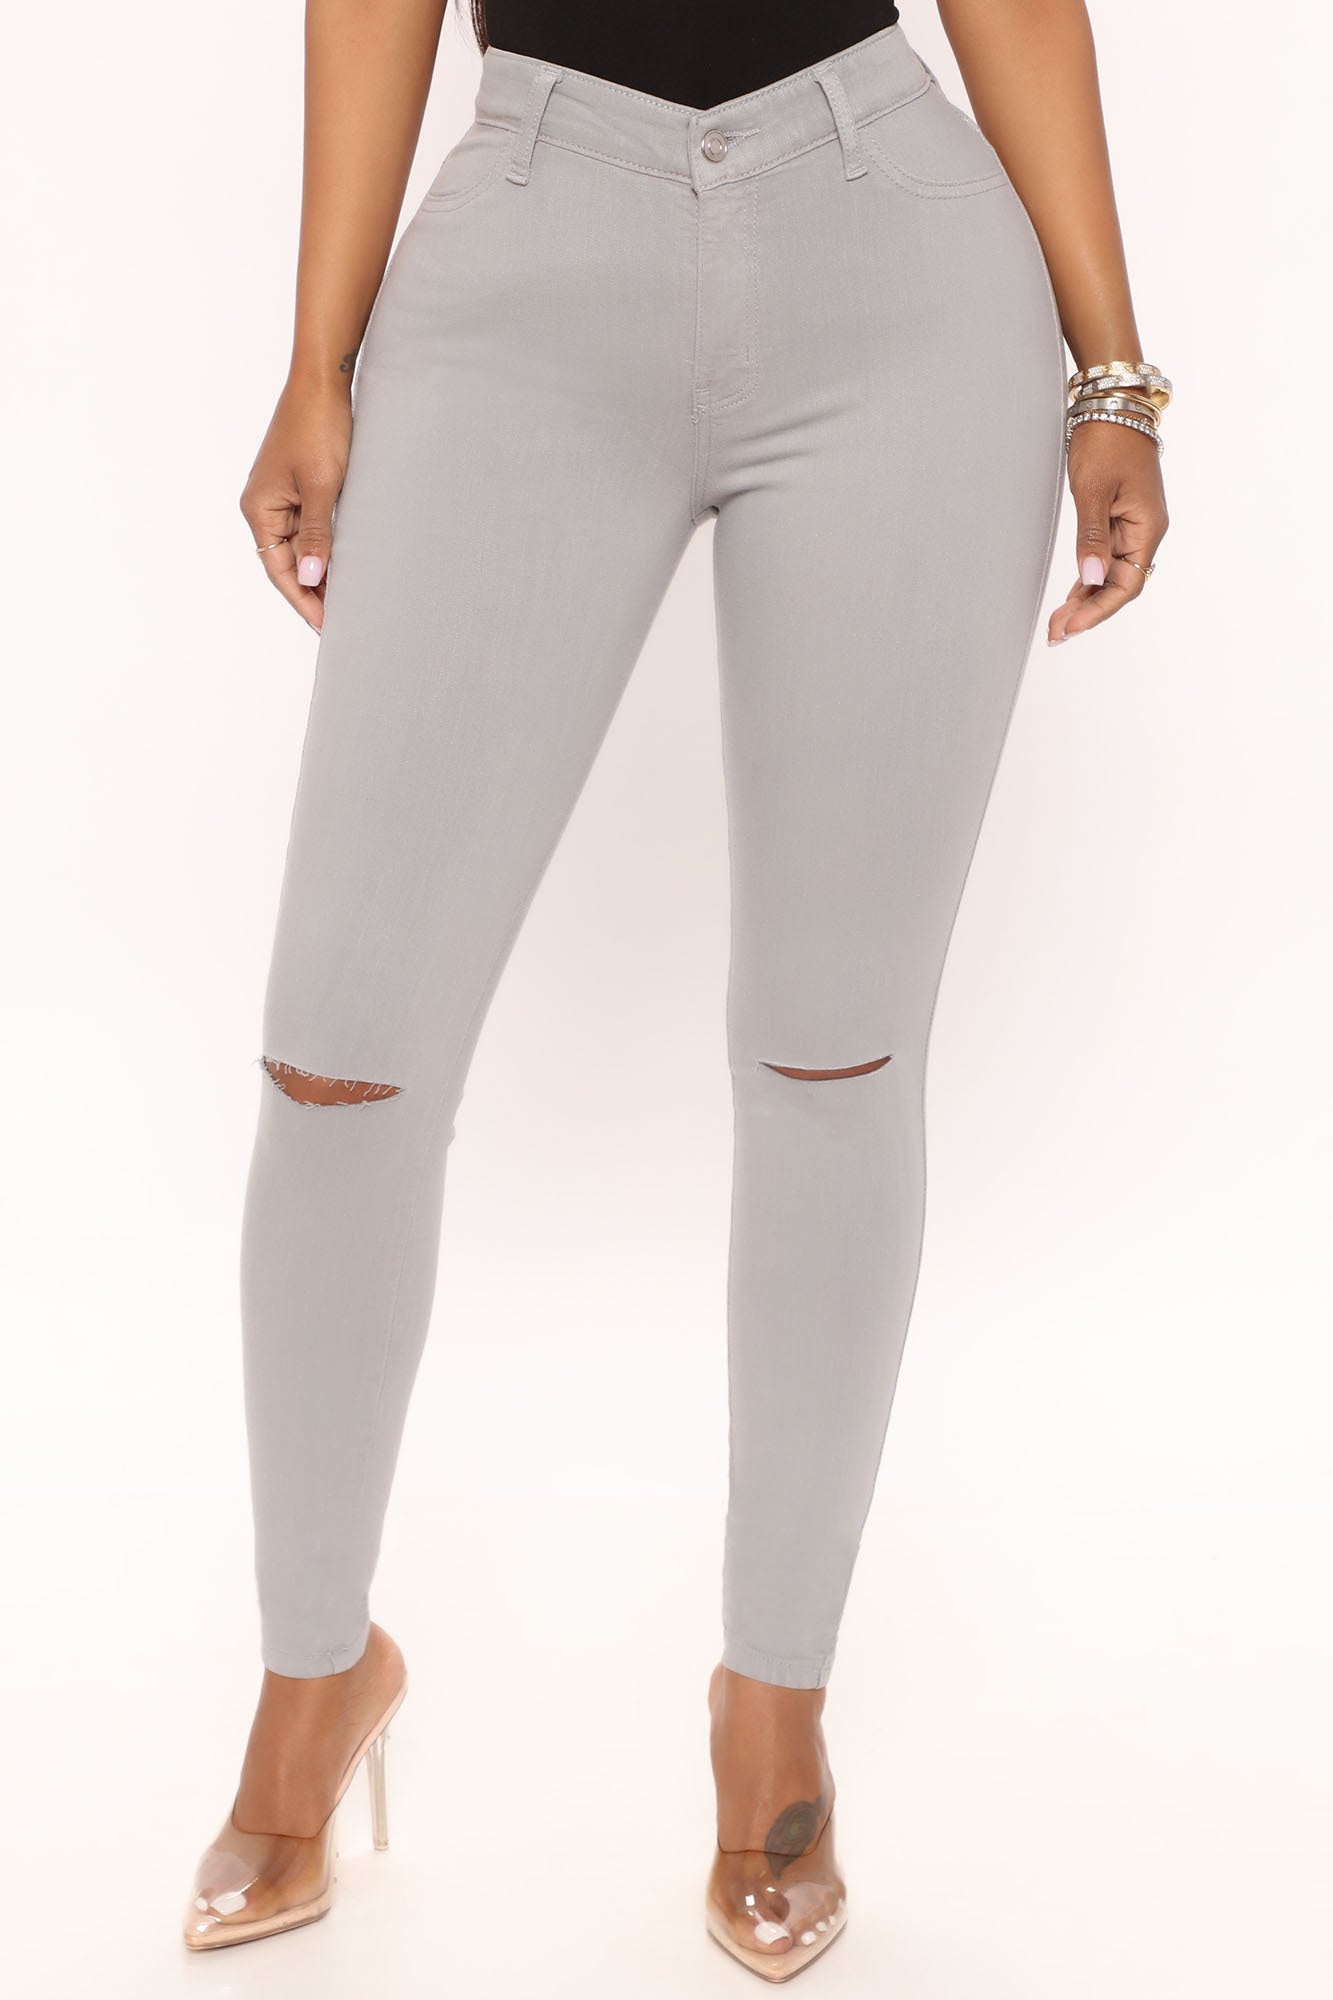 Canopy Jeans - Grey